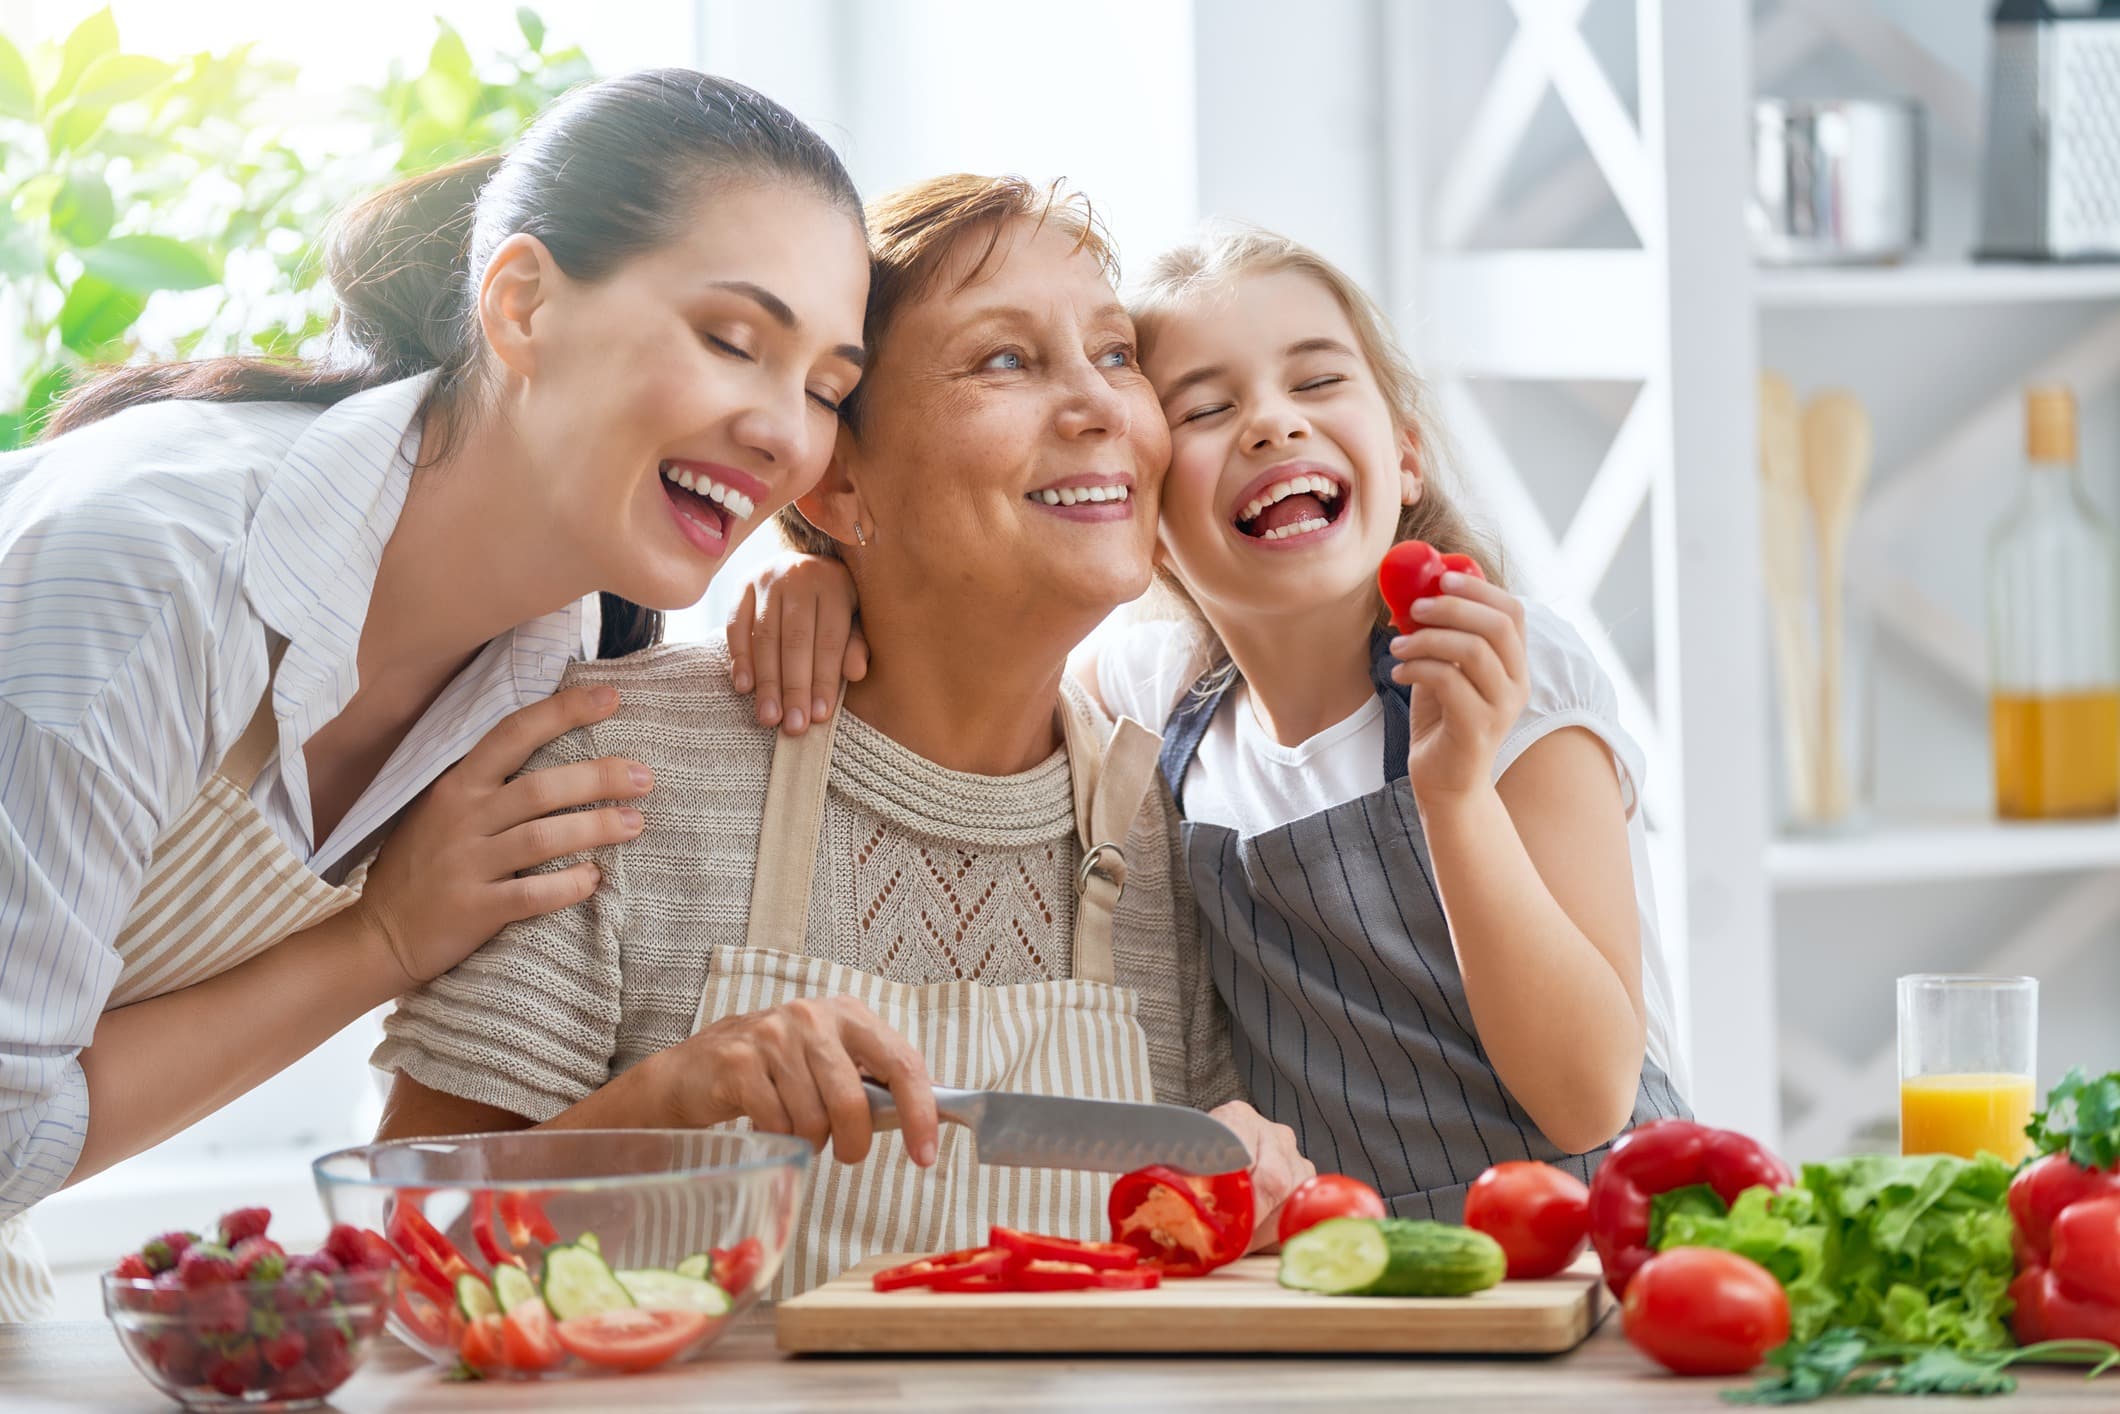 Mother, grandmother, and daughter enjoying fresh produce in remodeled kitchen